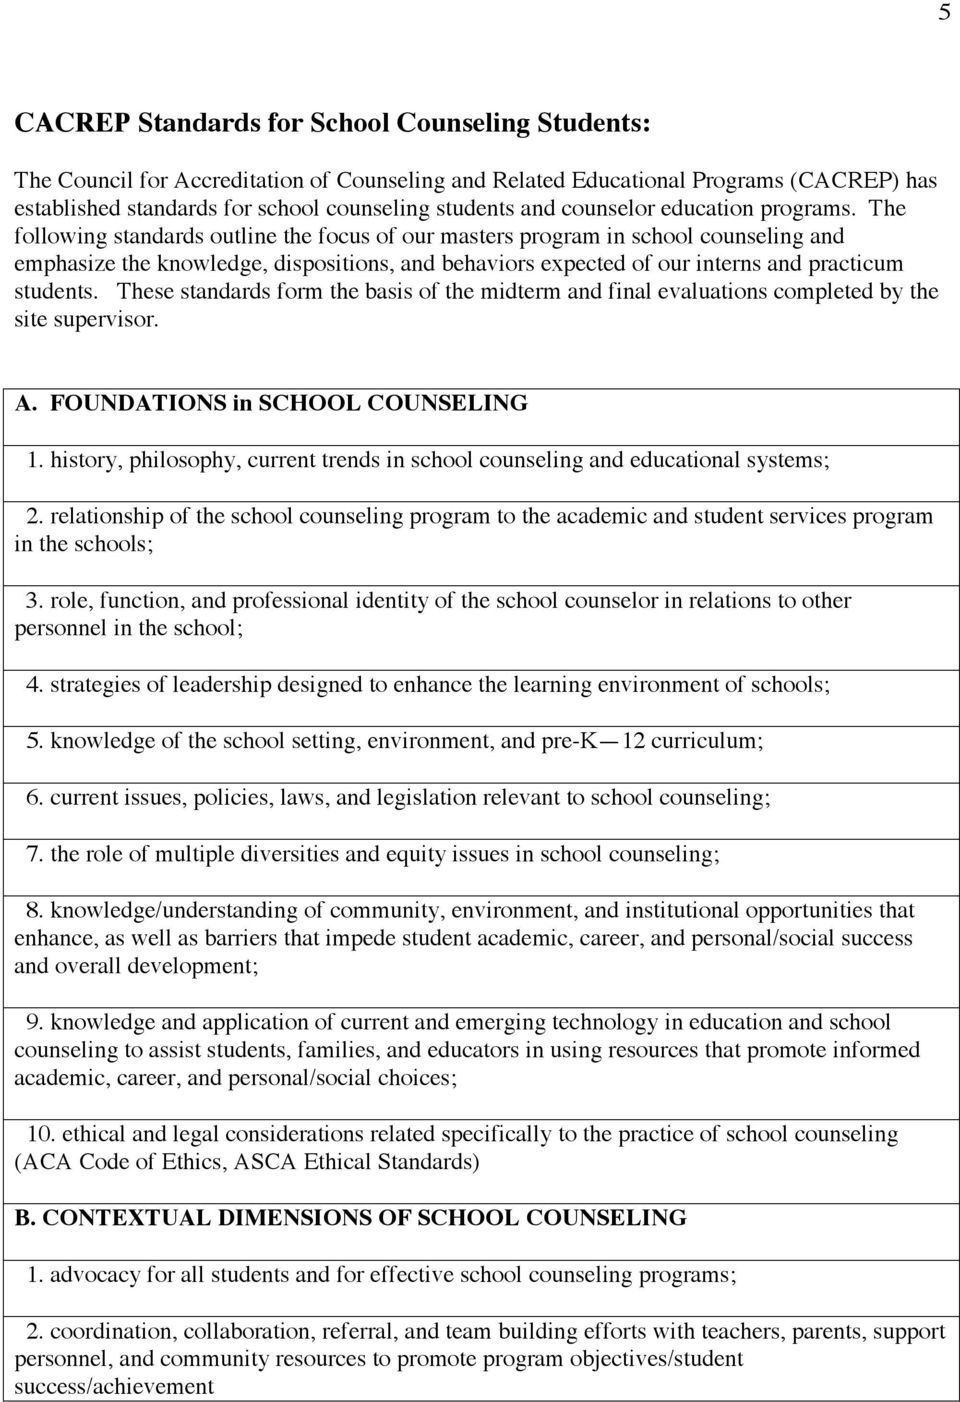 The following standards outline the focus of our masters program in school counseling and emphasize the knowledge, dispositions, and behaviors expected of our interns and practicum students.